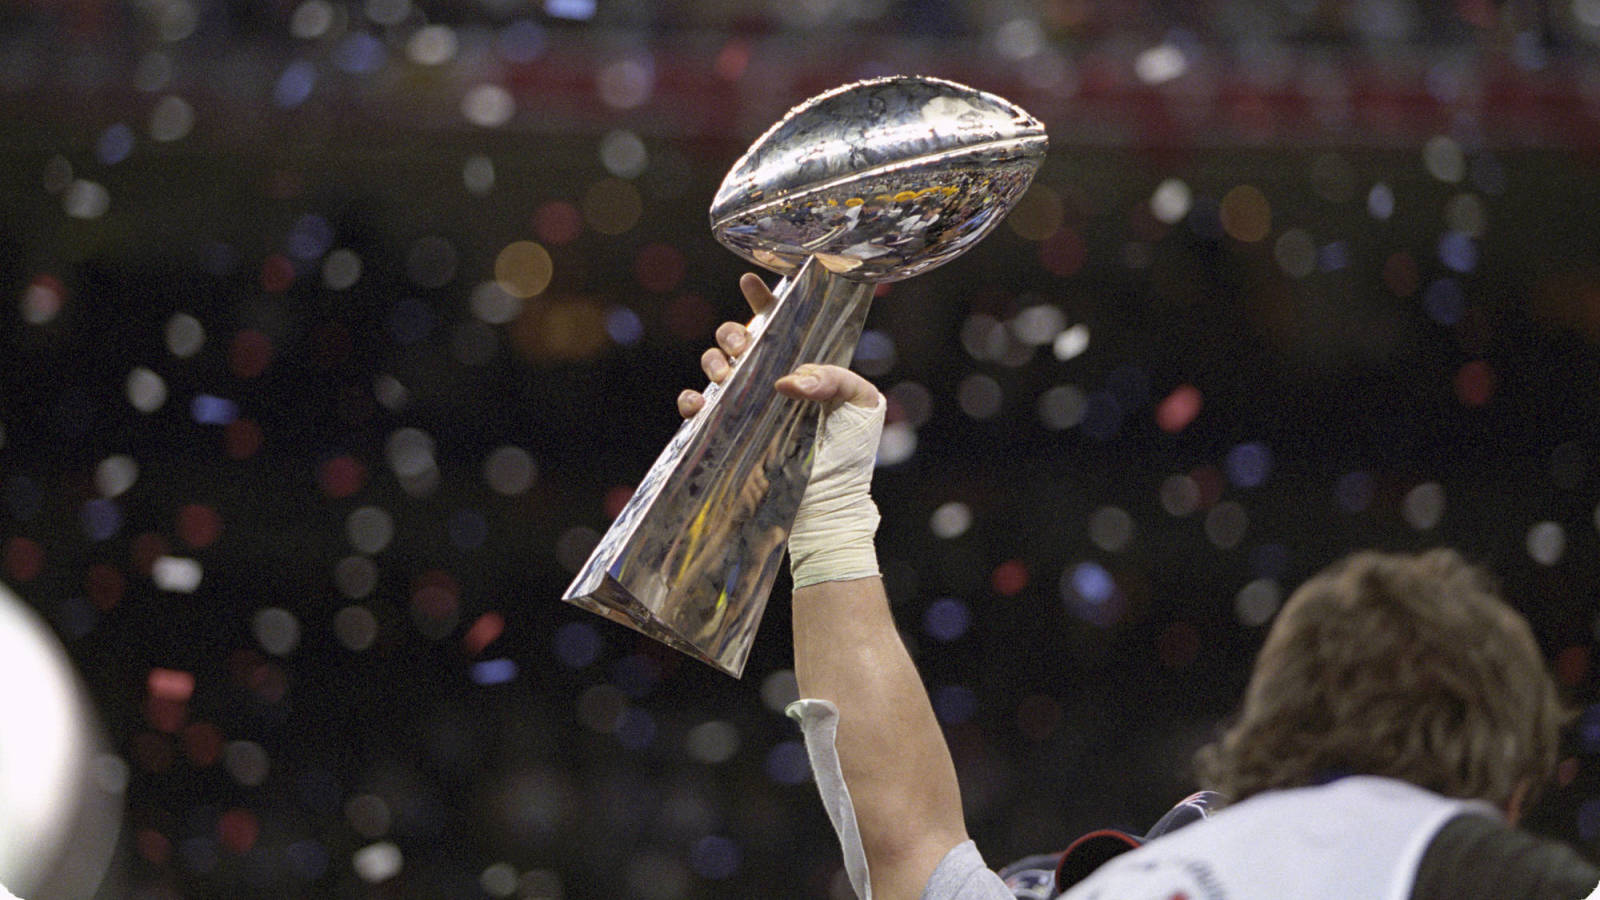 Who won the NFL championship the year you were born?